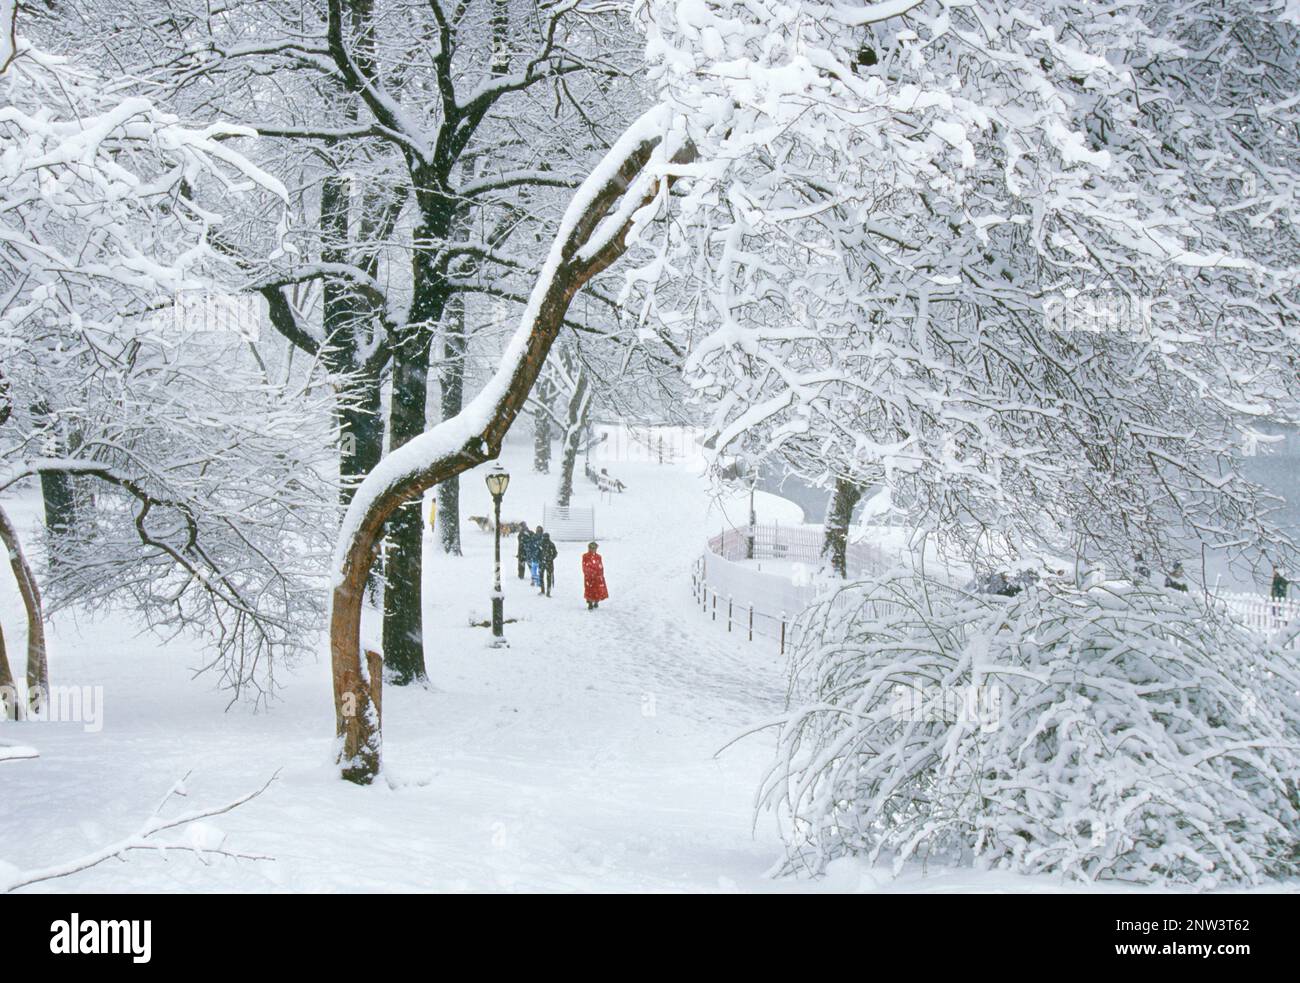 Snowstorm Central Park New York City. Winter weather scenic snow storms. People walking on path. Blizzard in Central Park Conservancy USA Stock Photo